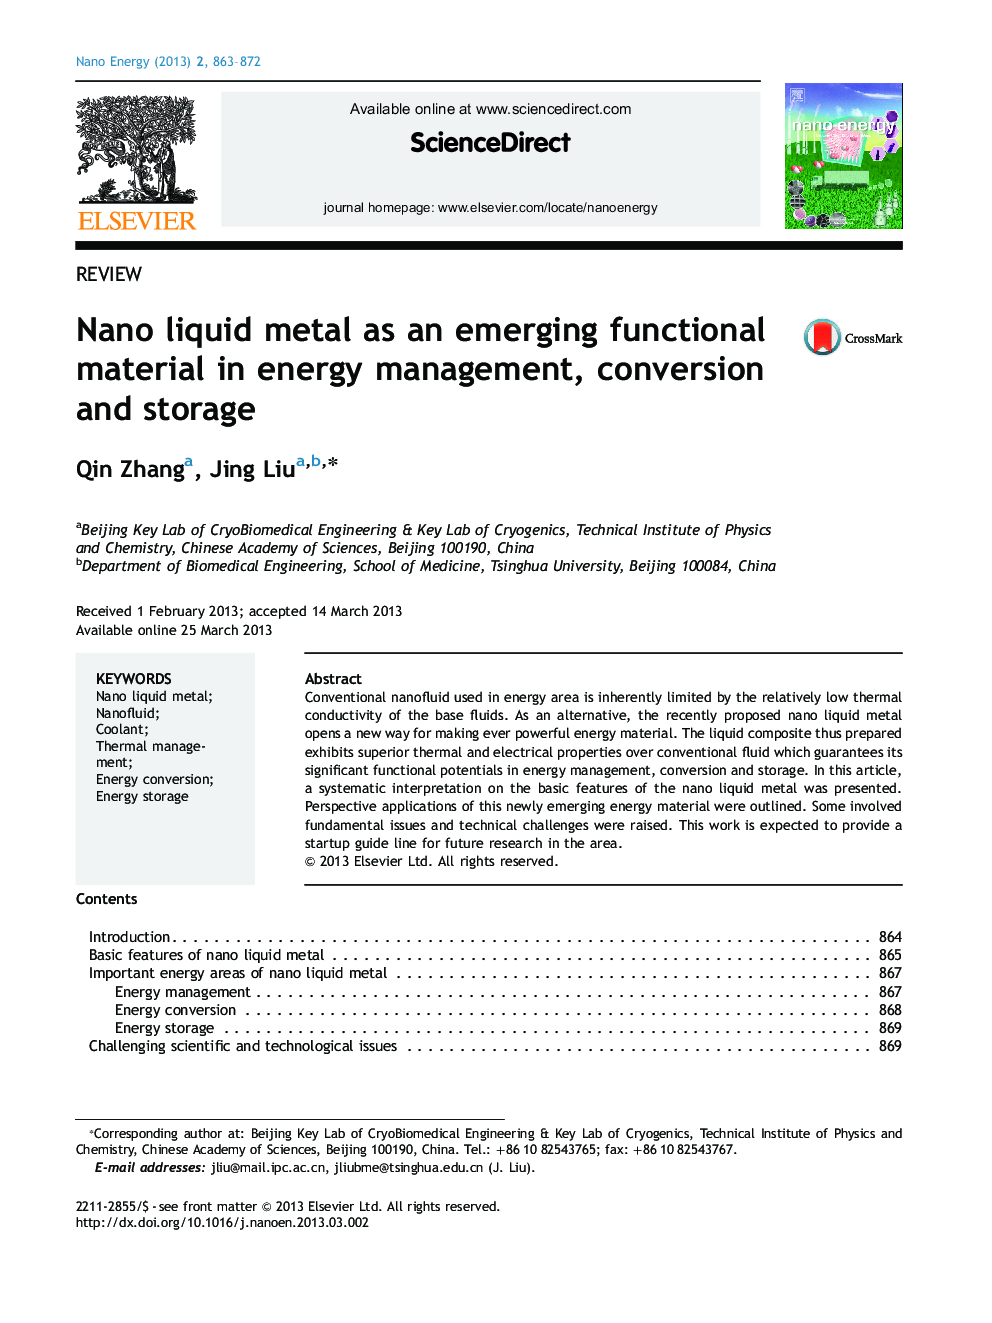 Nano liquid metal as an emerging functional material in energy management, conversion and storage